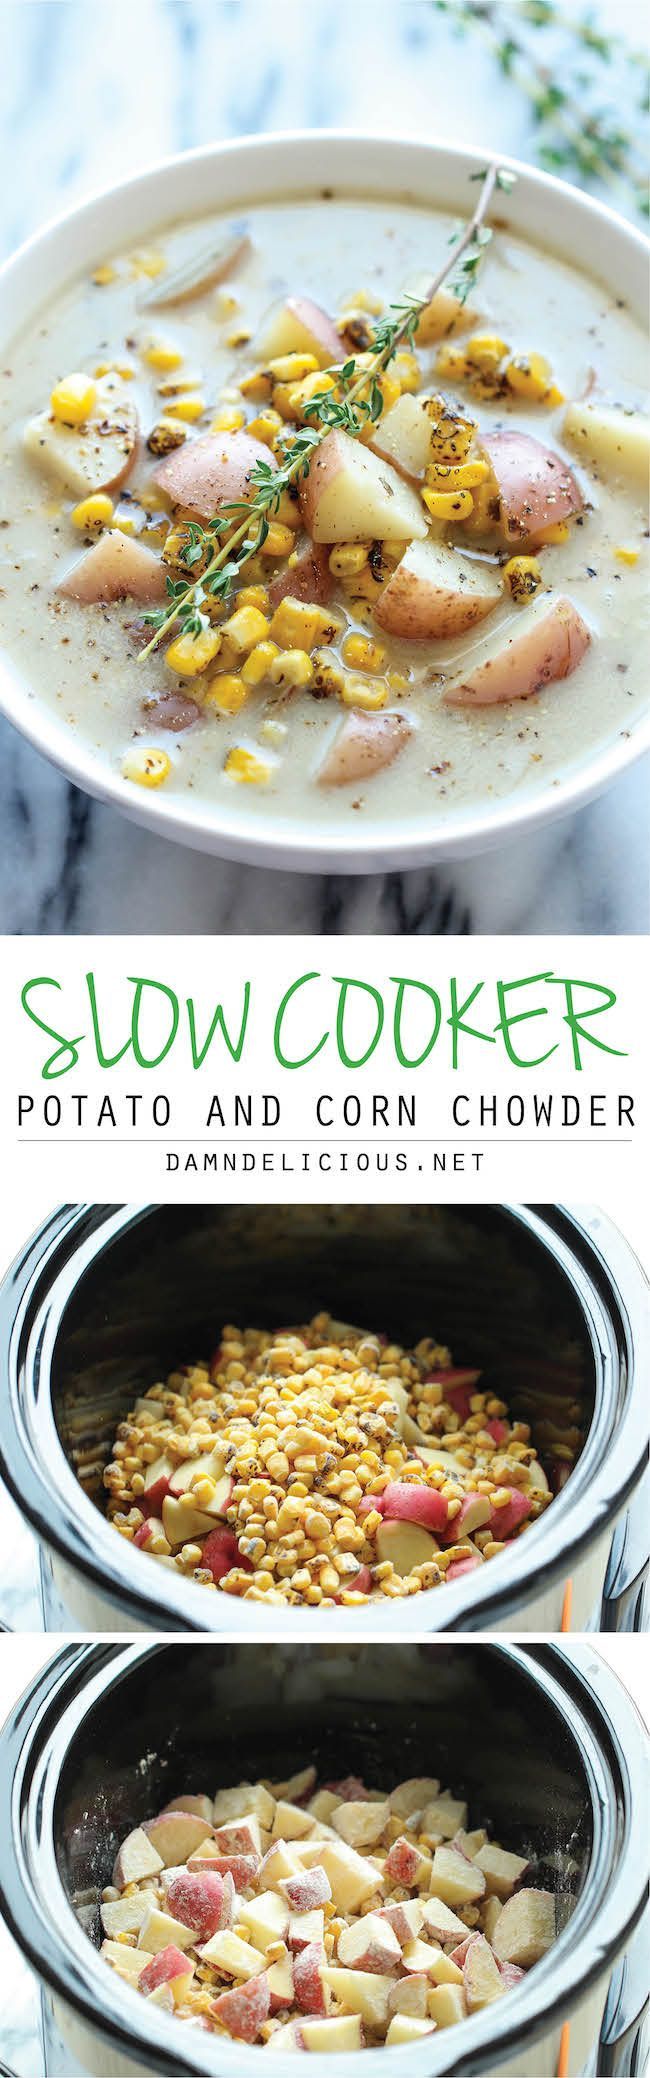 Slow Cooker Potato and Corn Chowder – The easiest chowder you will ever make. Th